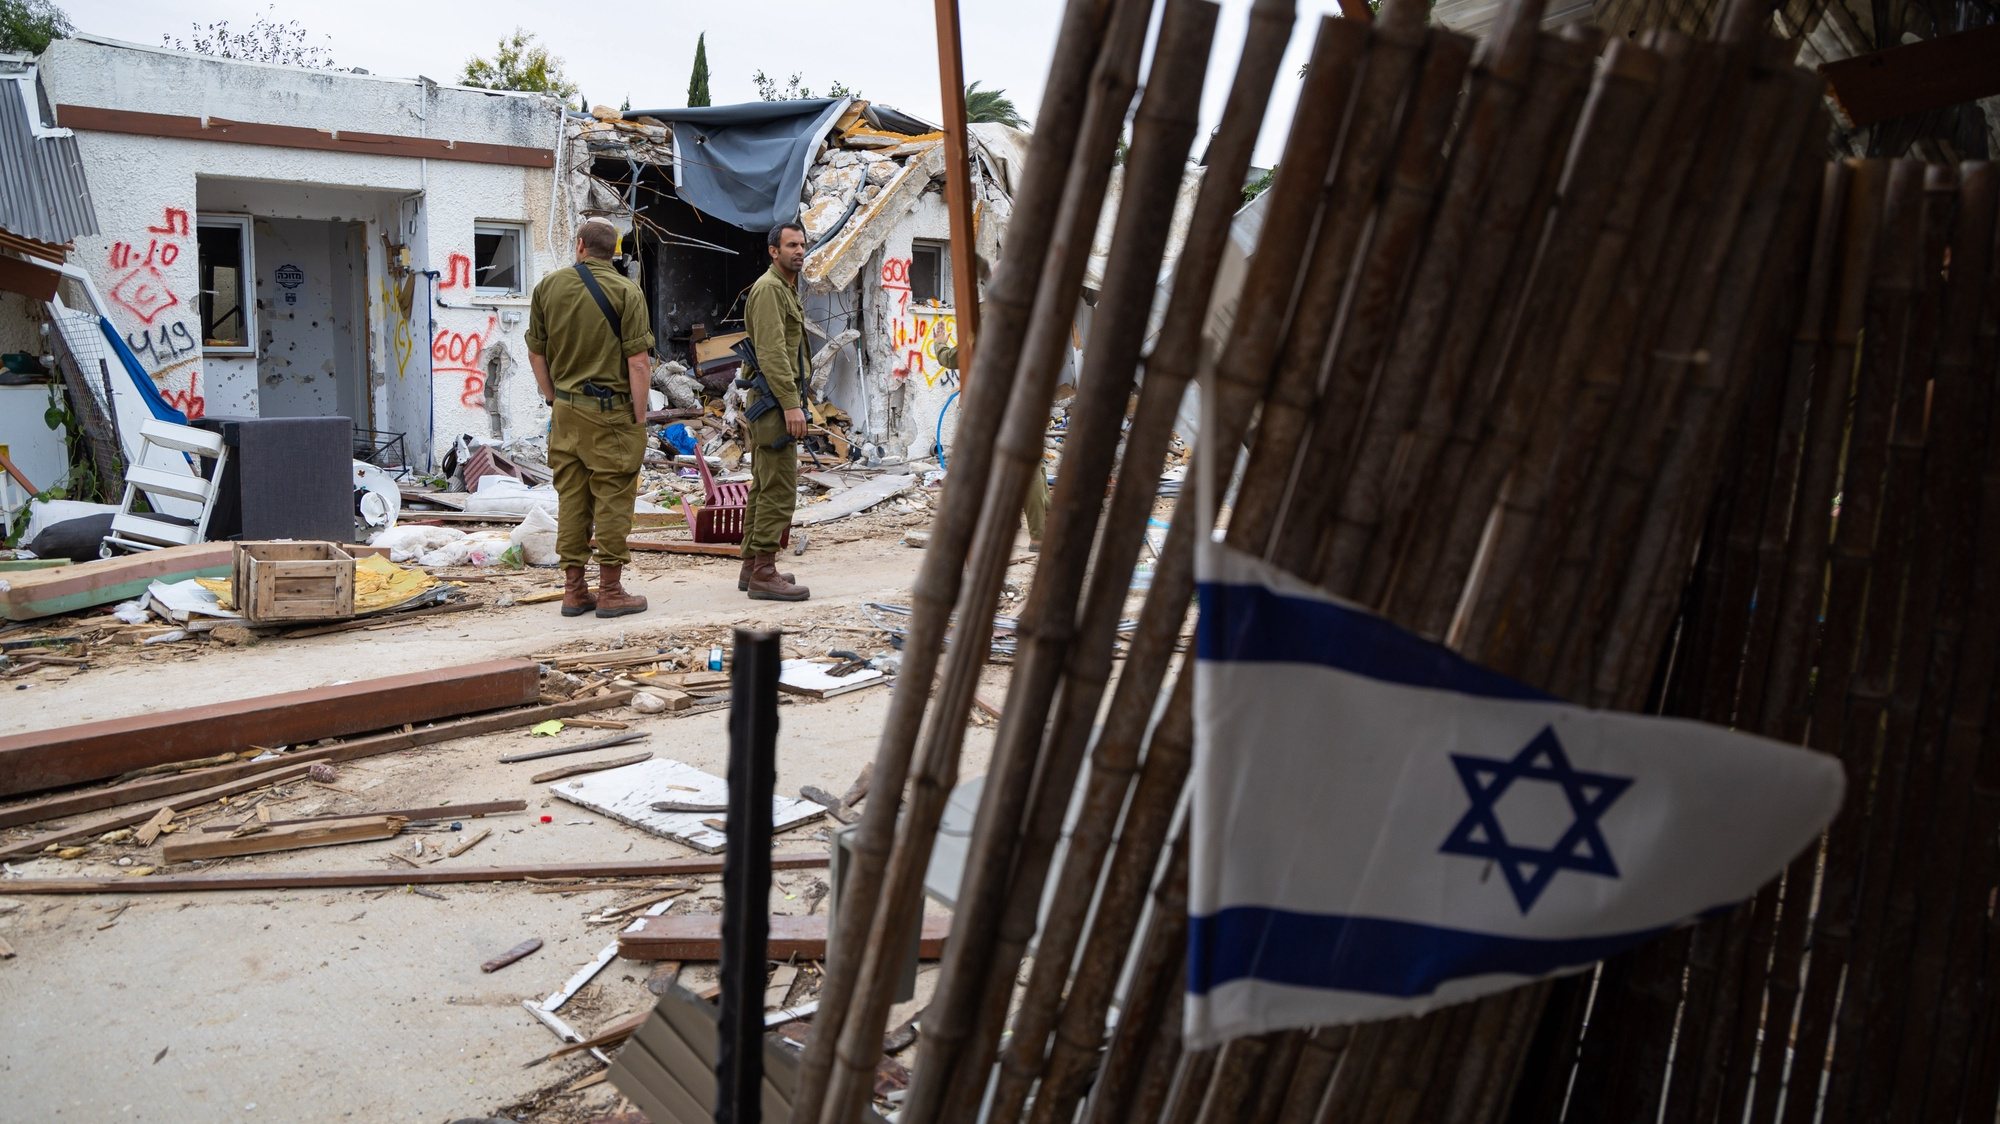 epa10989455 Israeli soldiers stand near damaged homes during a press visit at Kfar Aza Kibbutz, southern Israel, 22 November 2023. The kibbutz, located near the Gaza border, was the scene of an Hamas attack on 07 October which resulted in the deaths of dozens of Israelis. More than 12,700 Palestinians and at least 1,200 Israelis have been killed, according to the Israel Defense Forces (IDF) and the Palestinian health authority, since Hamas militants launched an attack against Israel from the Gaza Strip on 07 October, and the Israeli operations in Gaza and the West Bank which followed it.  EPA/CHRISTOPHE PETIT TESSON